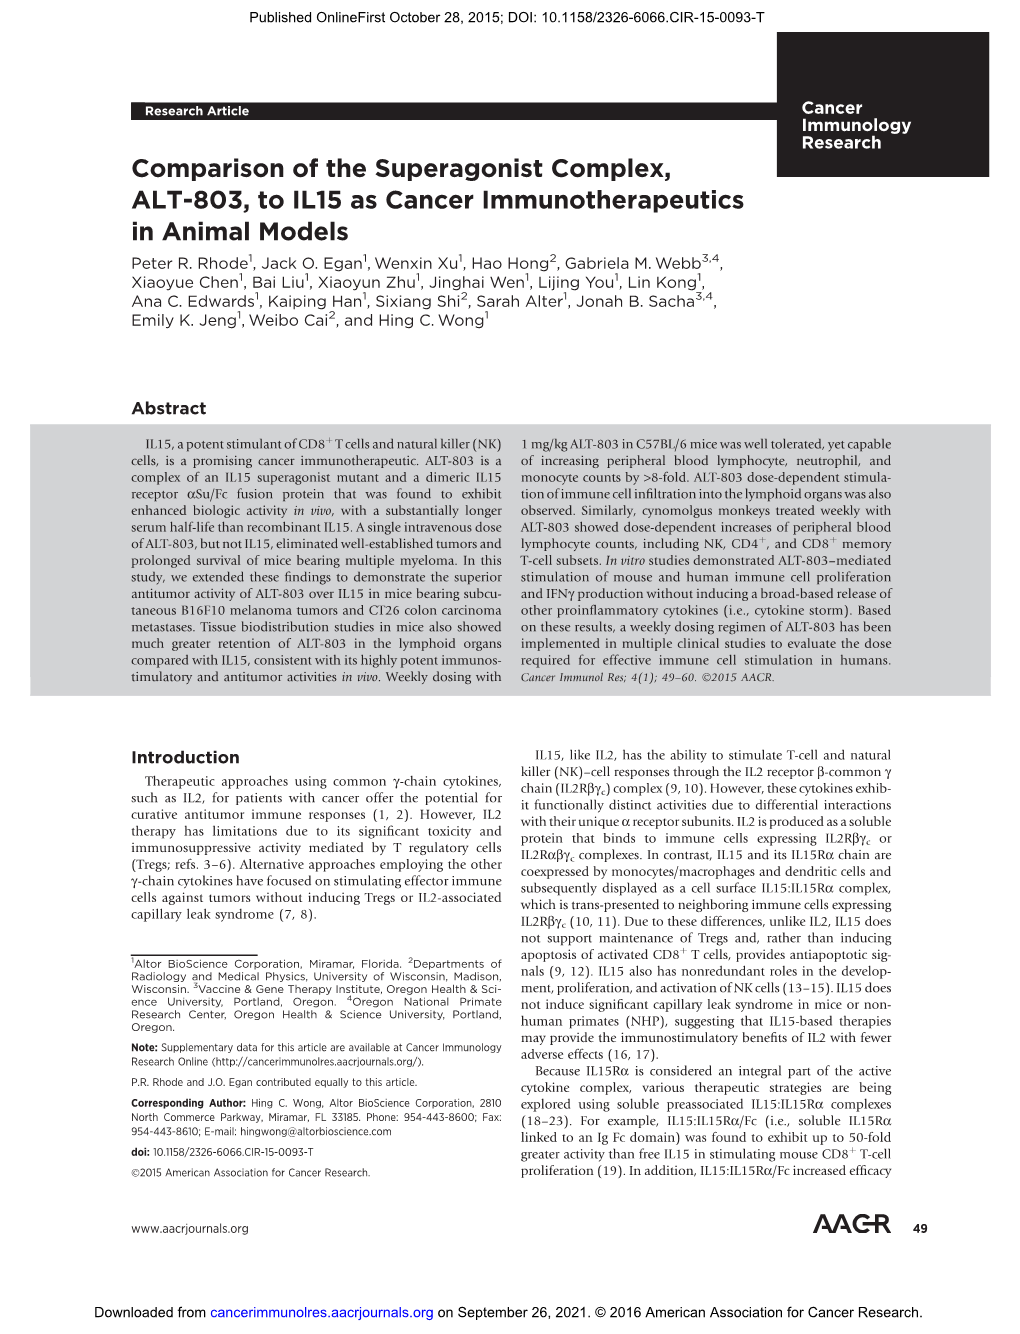 Comparison of the Superagonist Complex, ALT-803, to IL15 As Cancer Immunotherapeutics in Animal Models Peter R